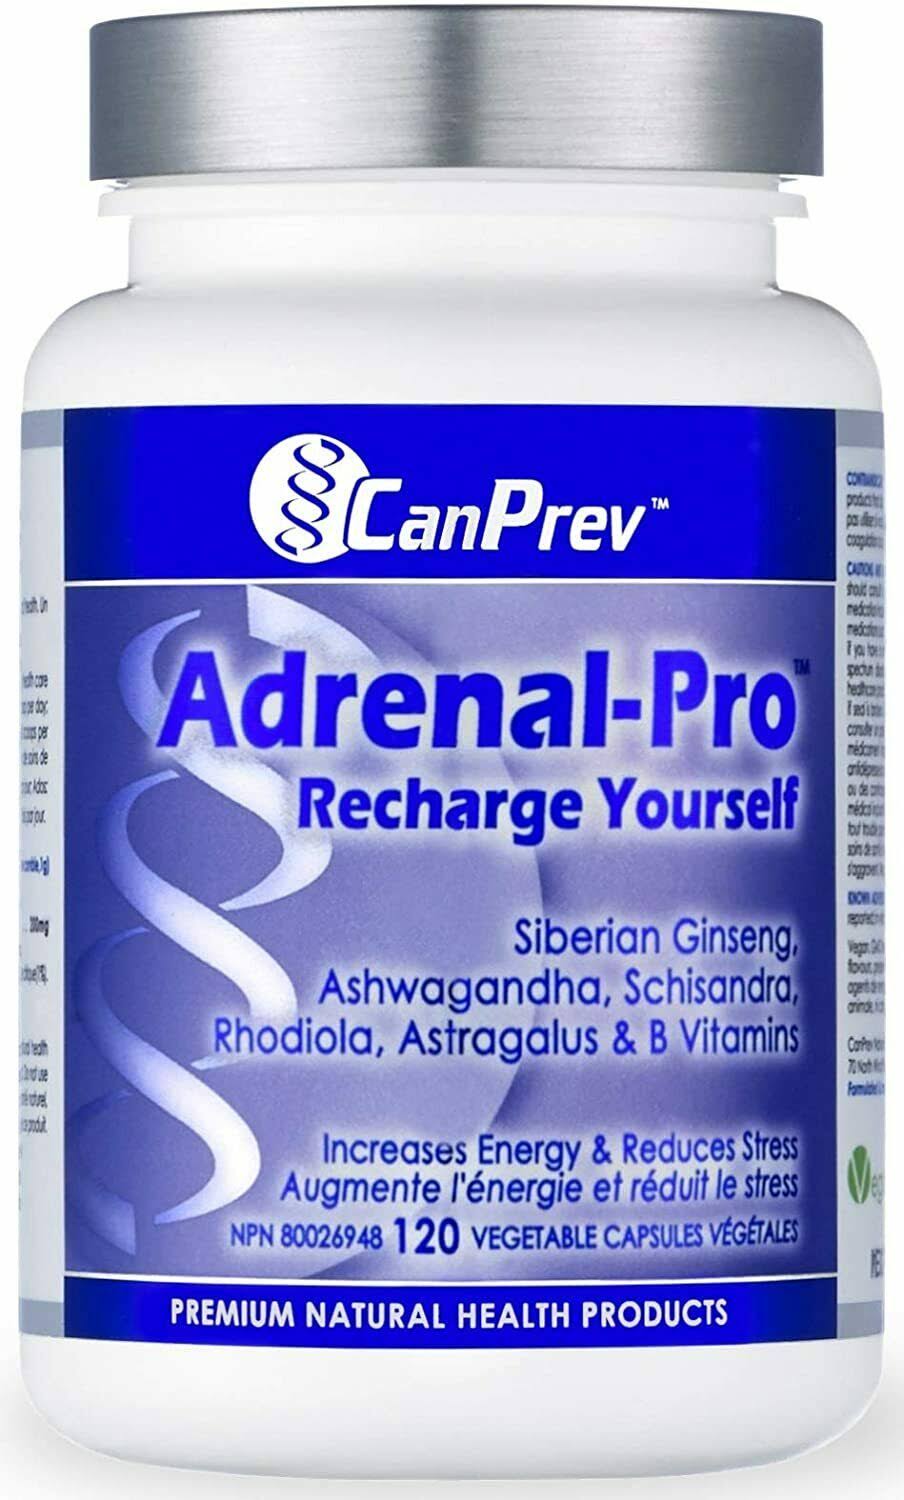 CanPrev Adrenal-Pro Recharge Yourself Vegi Capsules, 120 Count